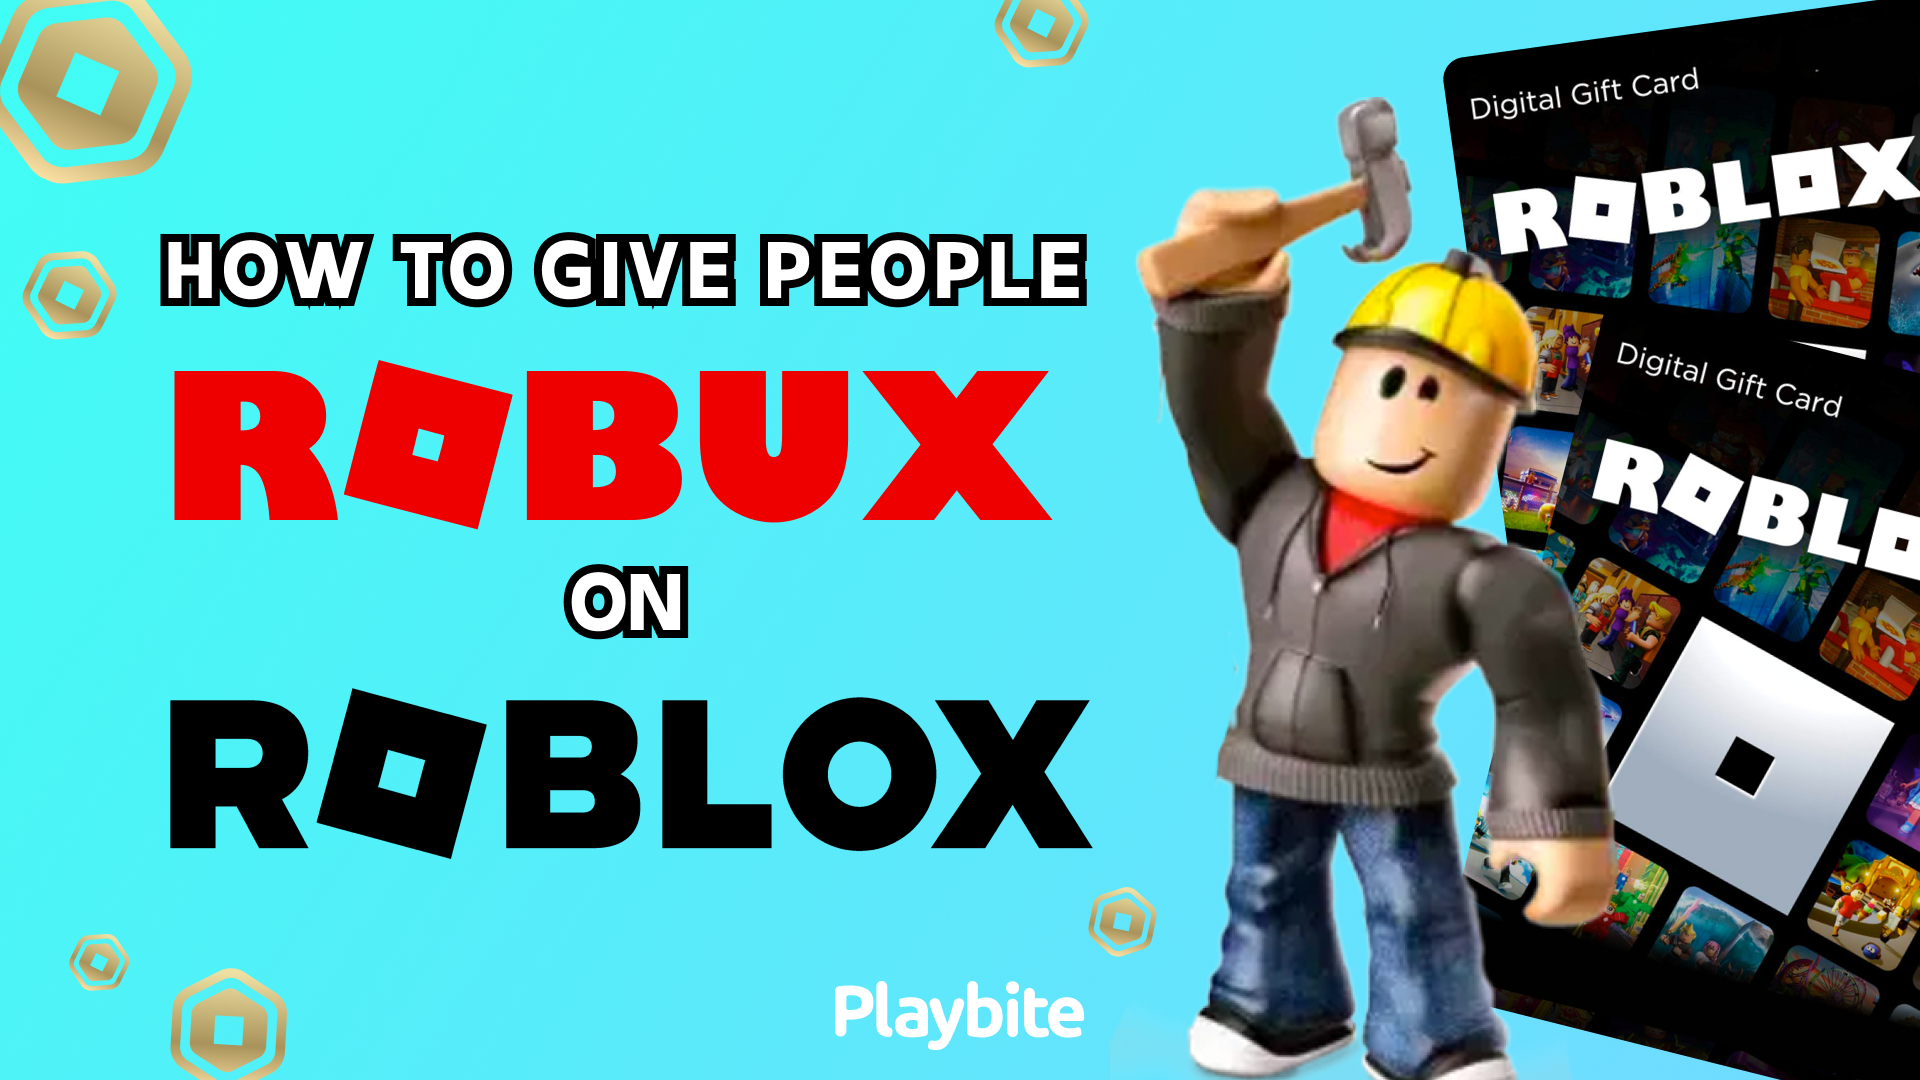 How To Give People Robux On Roblox